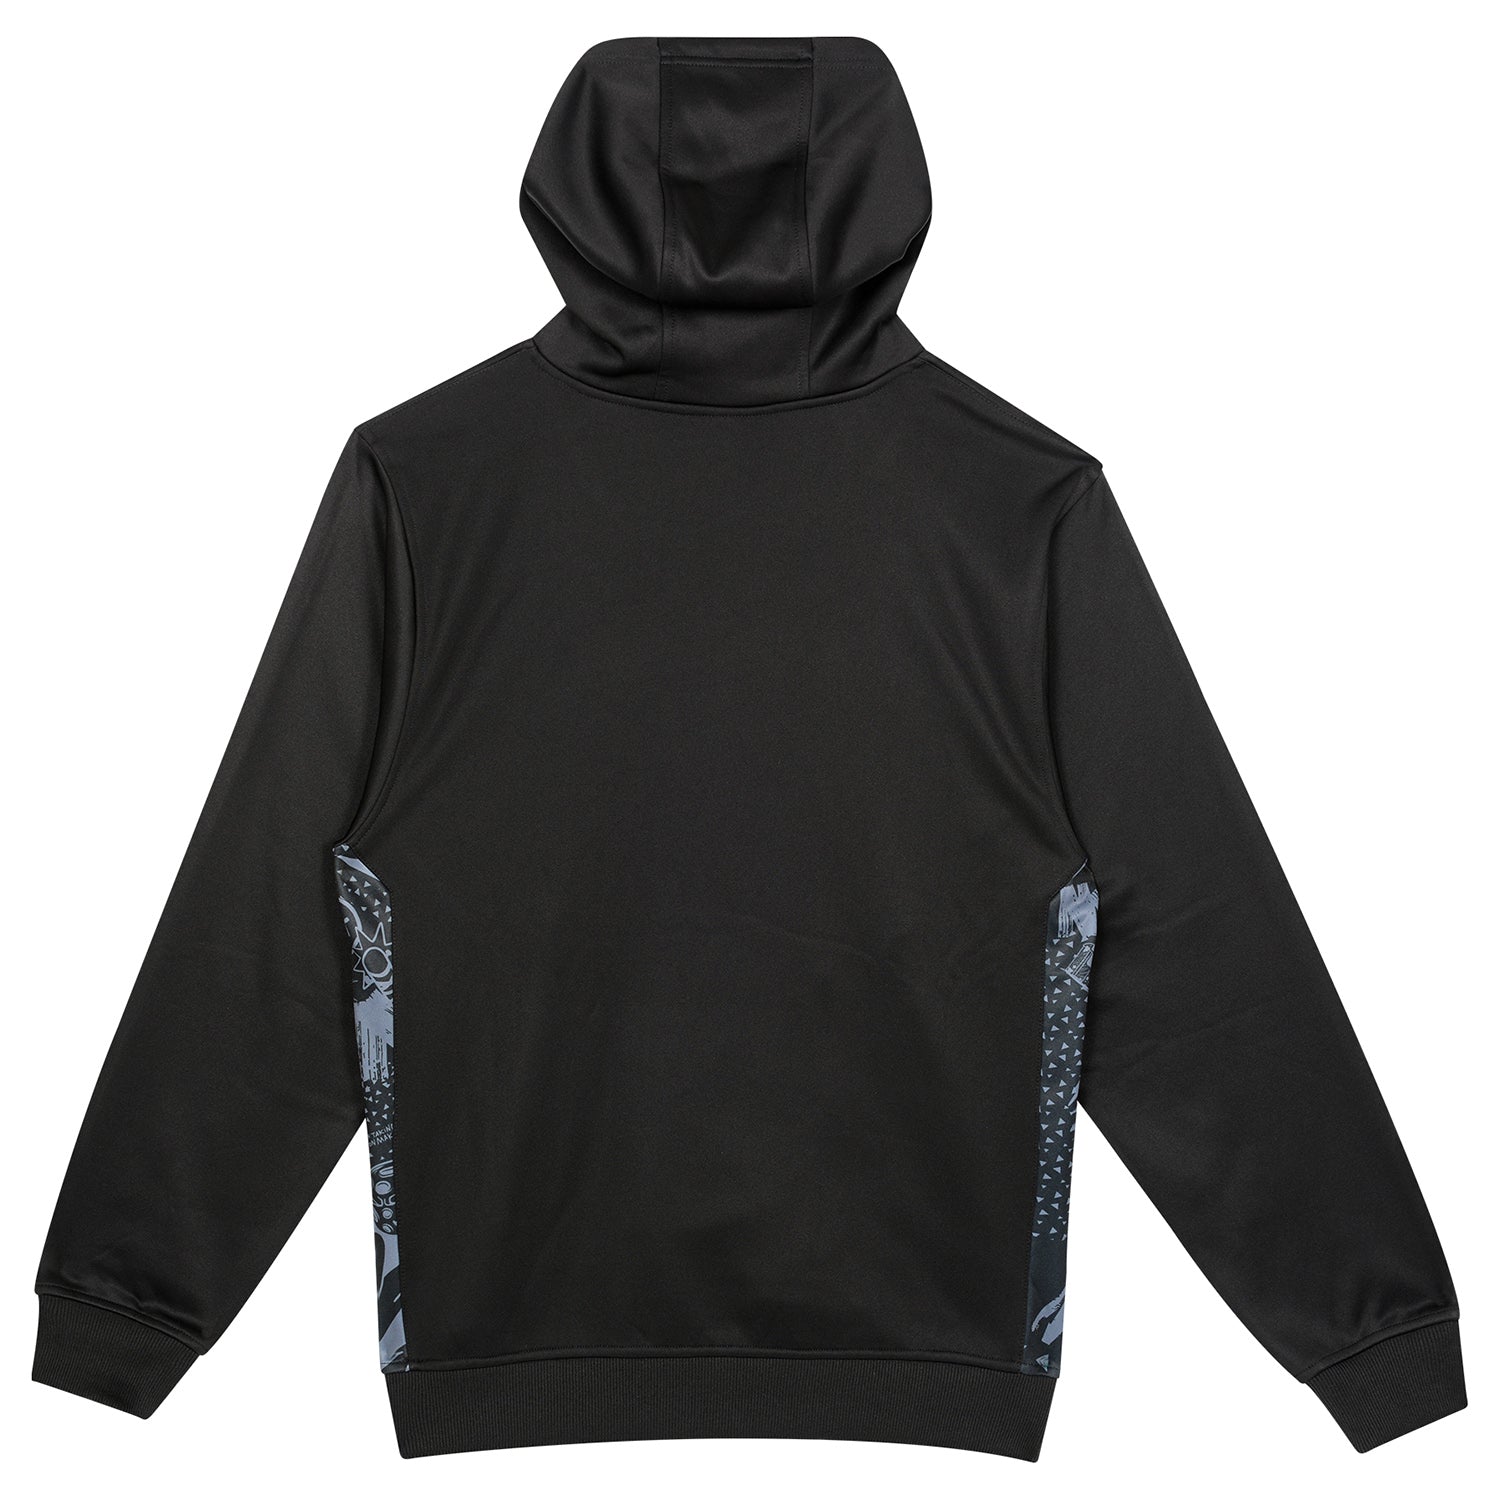 New York Subliners Black 2023 Pro Hoodie - Back View